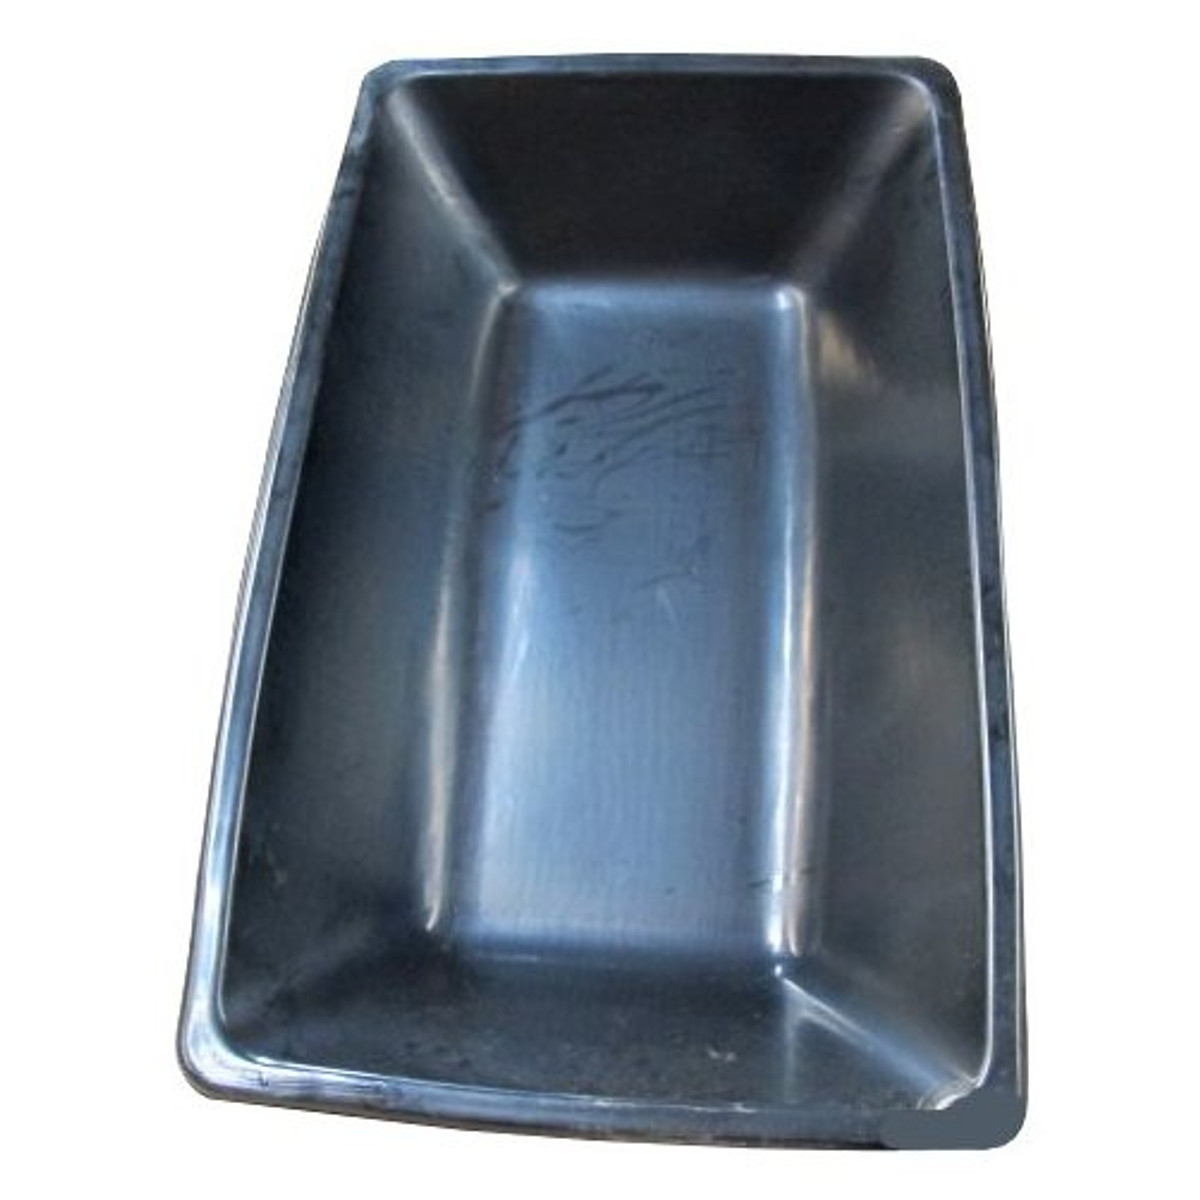 60 X 36 X 12 Plastic Mortar Mixing Tub Available For Local Pick Up Only